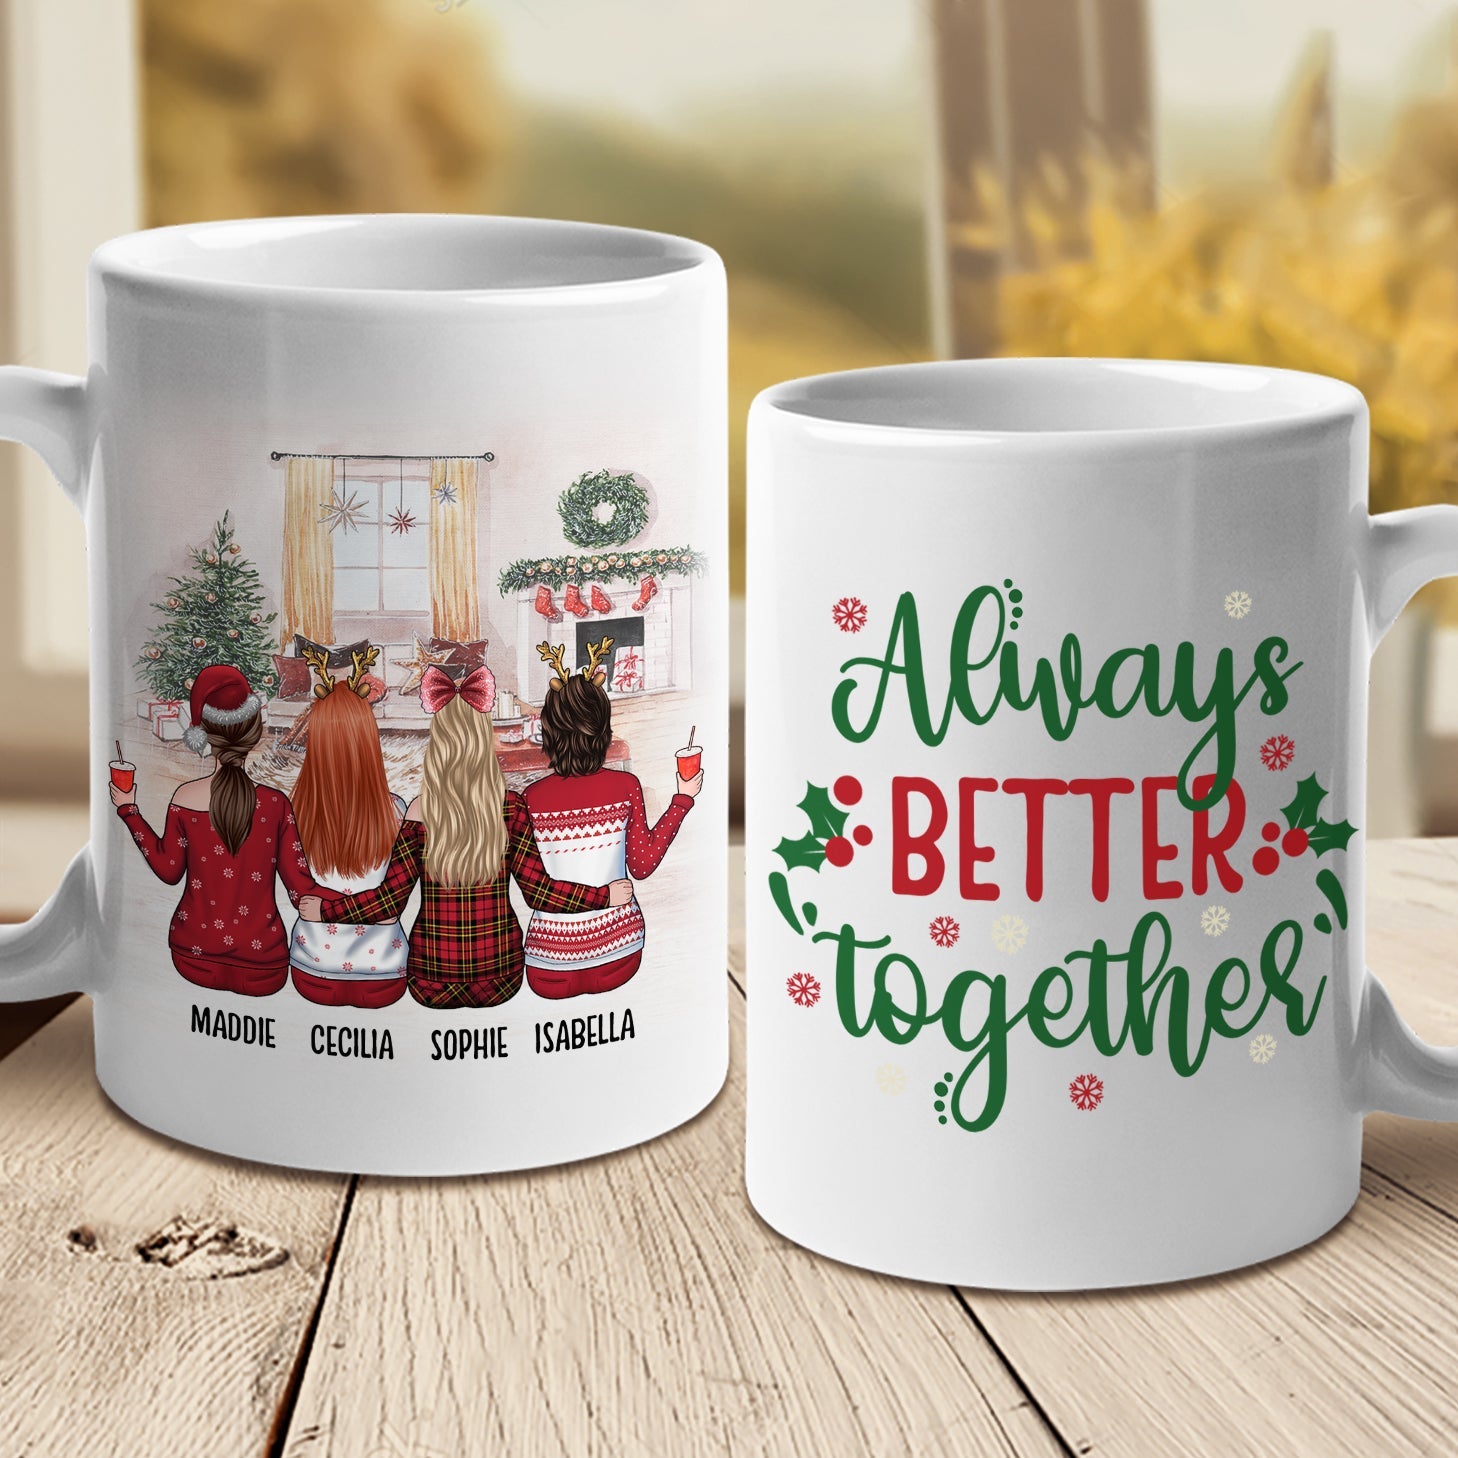 Besties Forever - Always Better Together - Personalized Mug